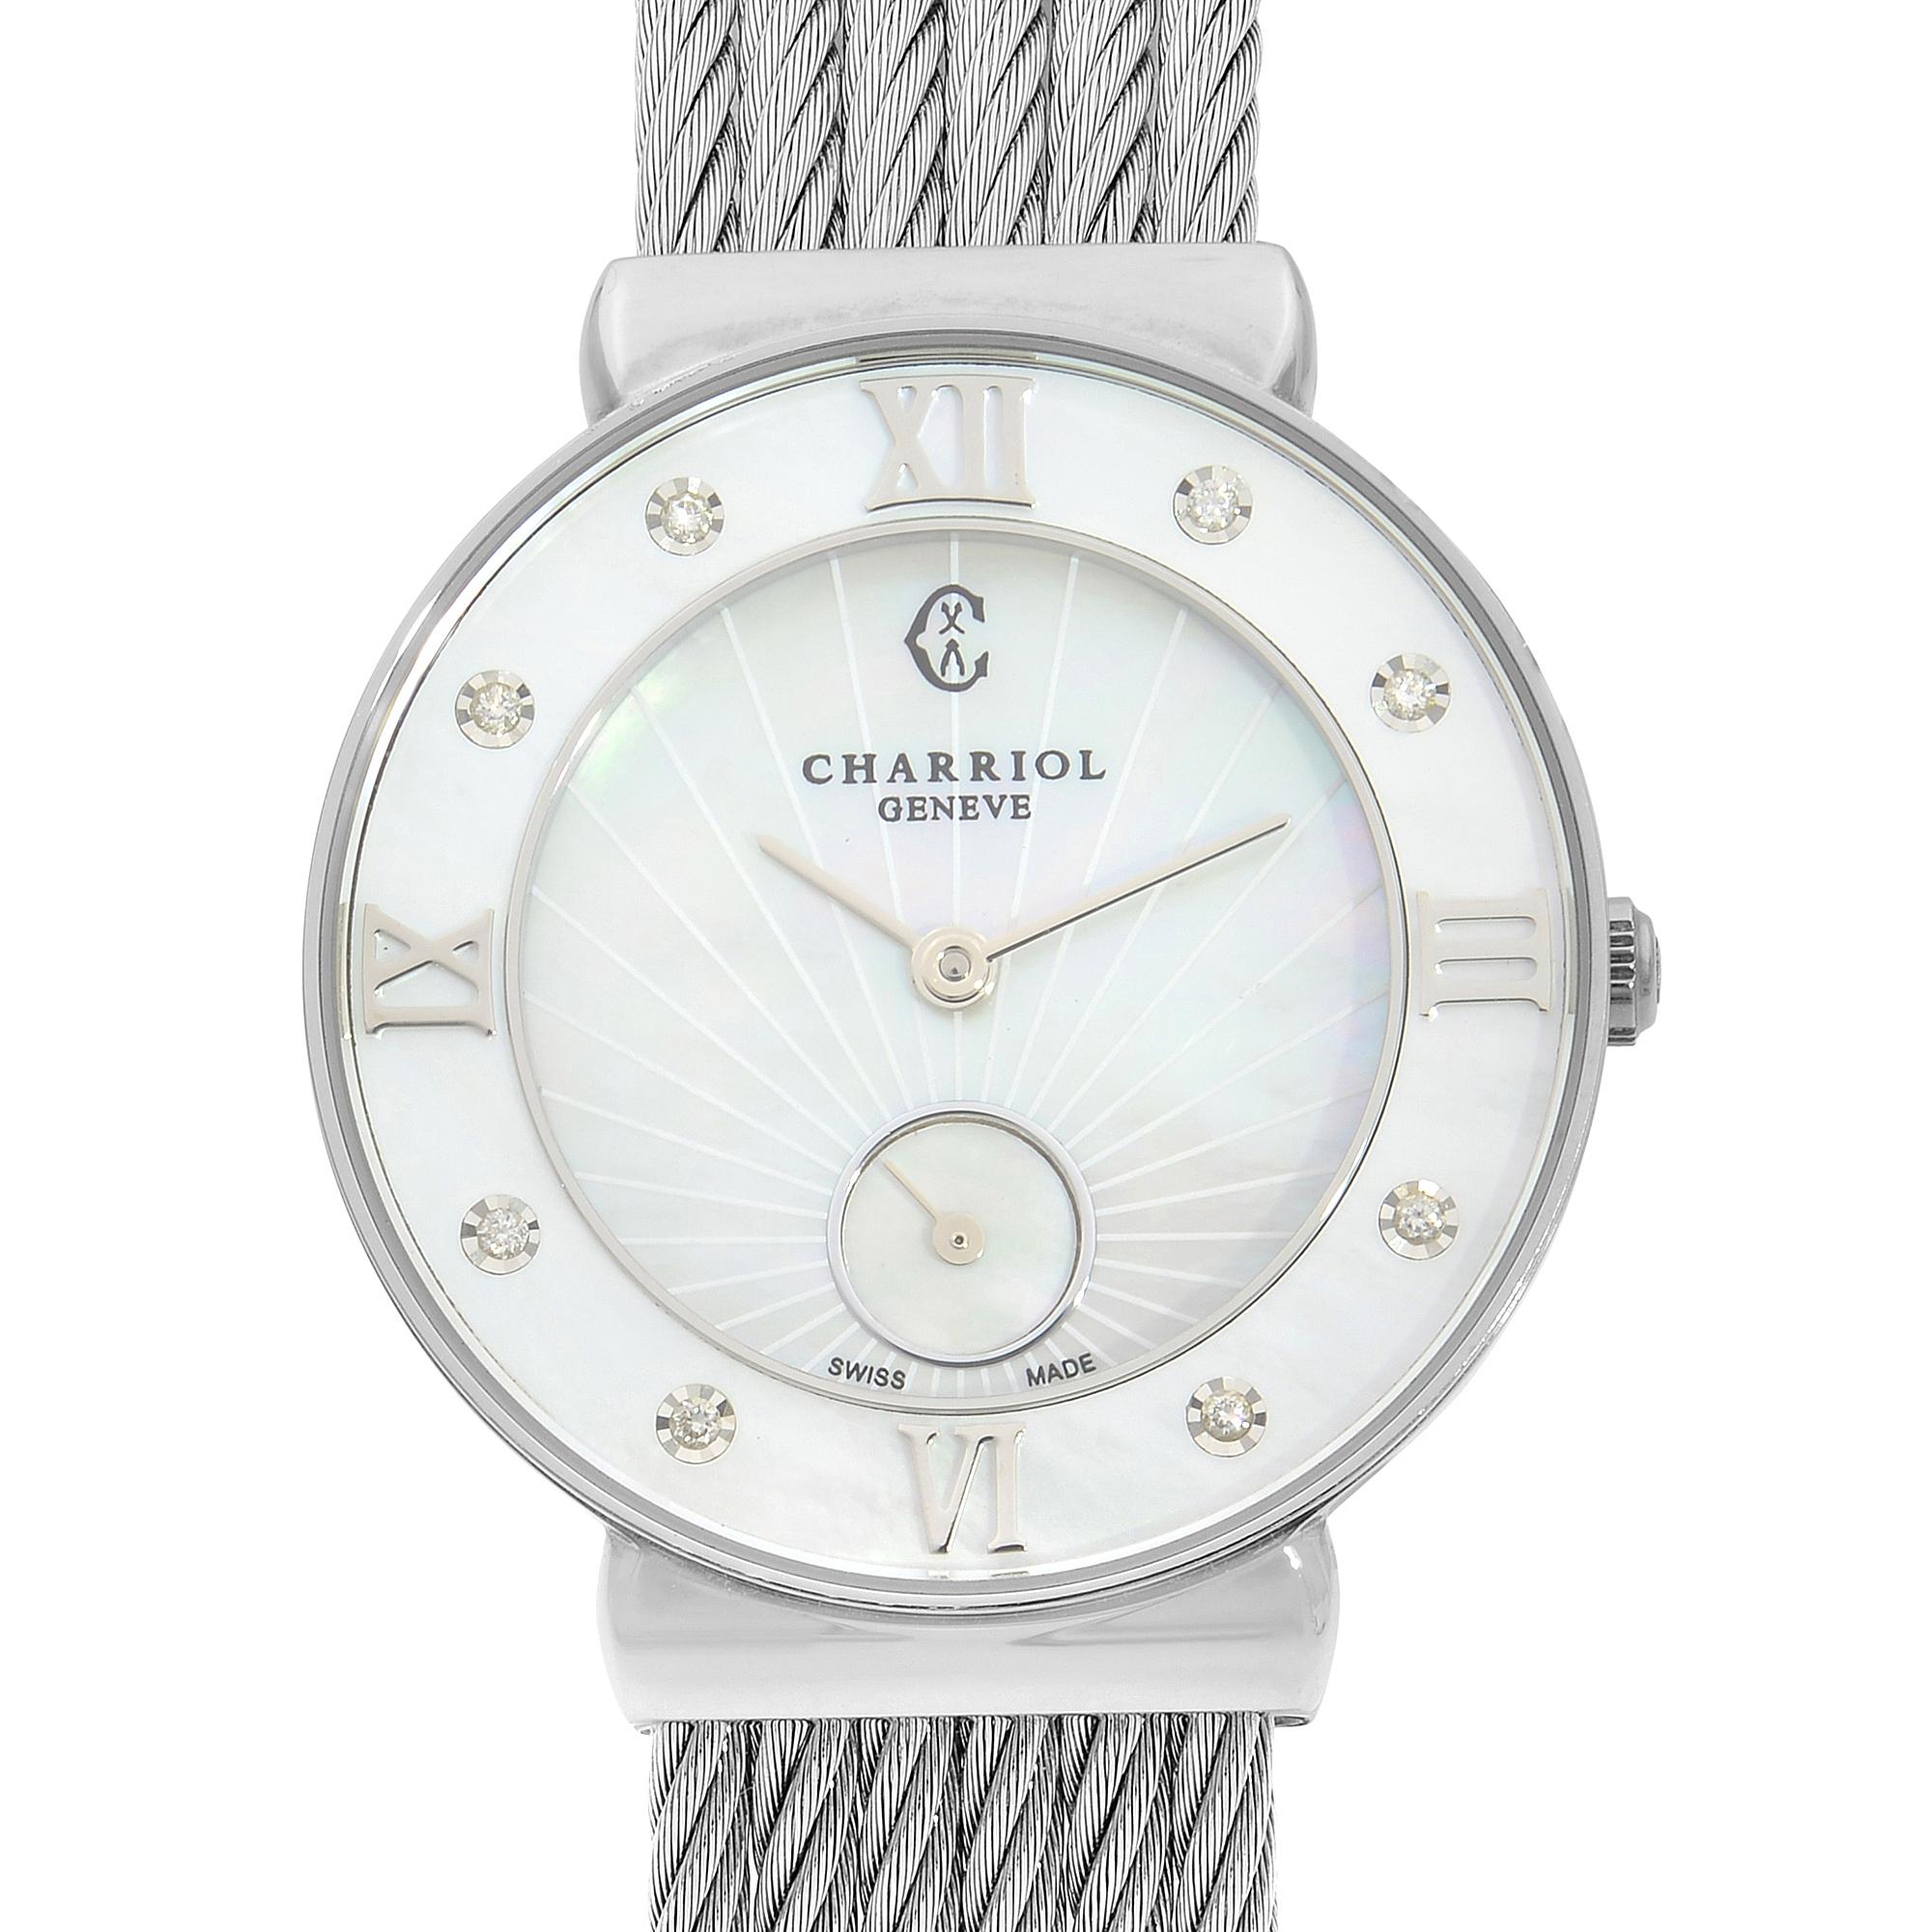 This display model Charriol St Tropez ST30SD.560.008 is a beautiful Ladie's timepiece that is powered by quartz (battery) movement which is cased in a stainless steel case. It has a round shape face, diamonds, small seconds subdial dial and has hand